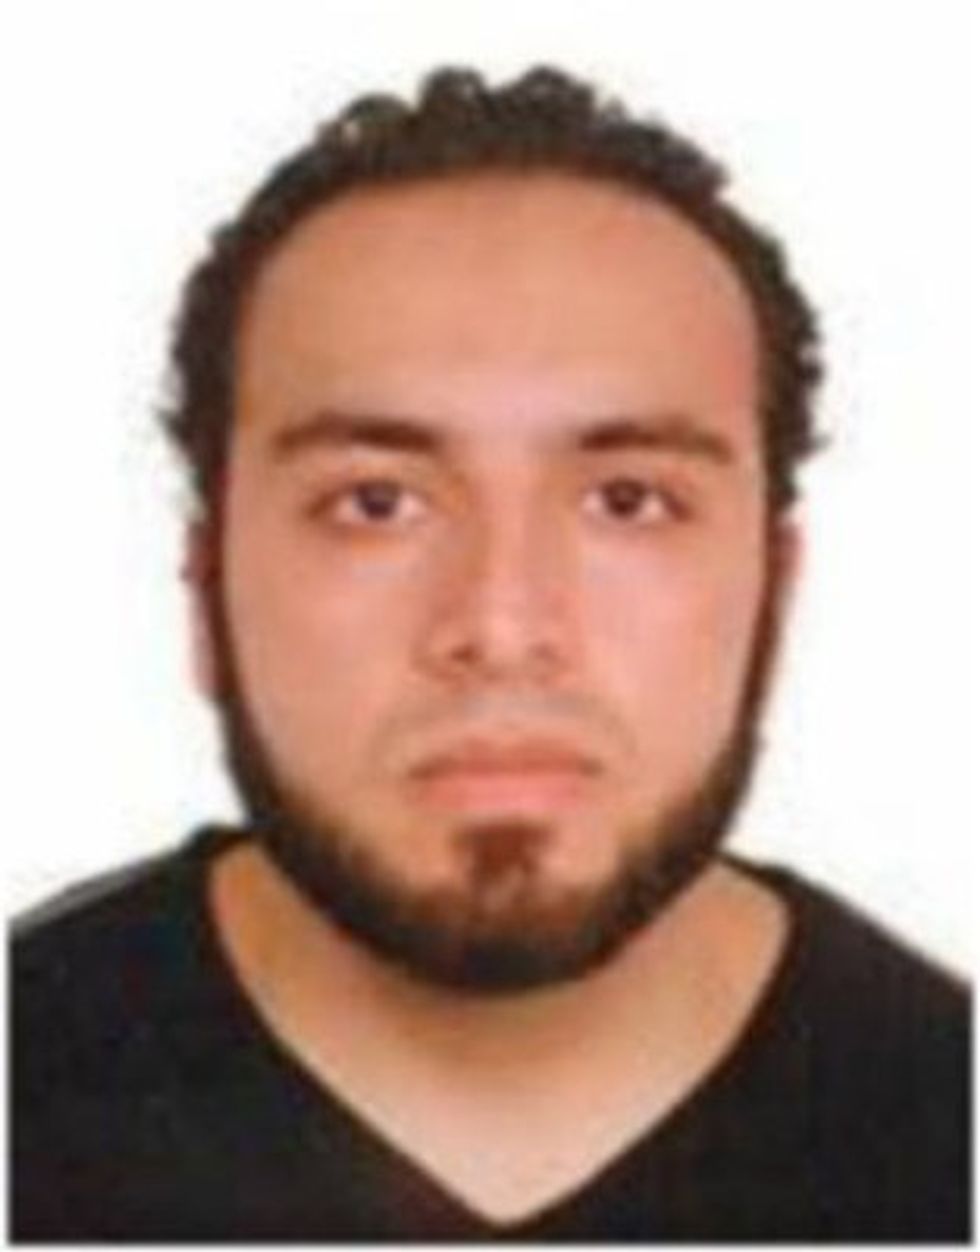 Suspected NYC, NJ bomber Ahmad Rahami arrested following shootout with police — here's what we know